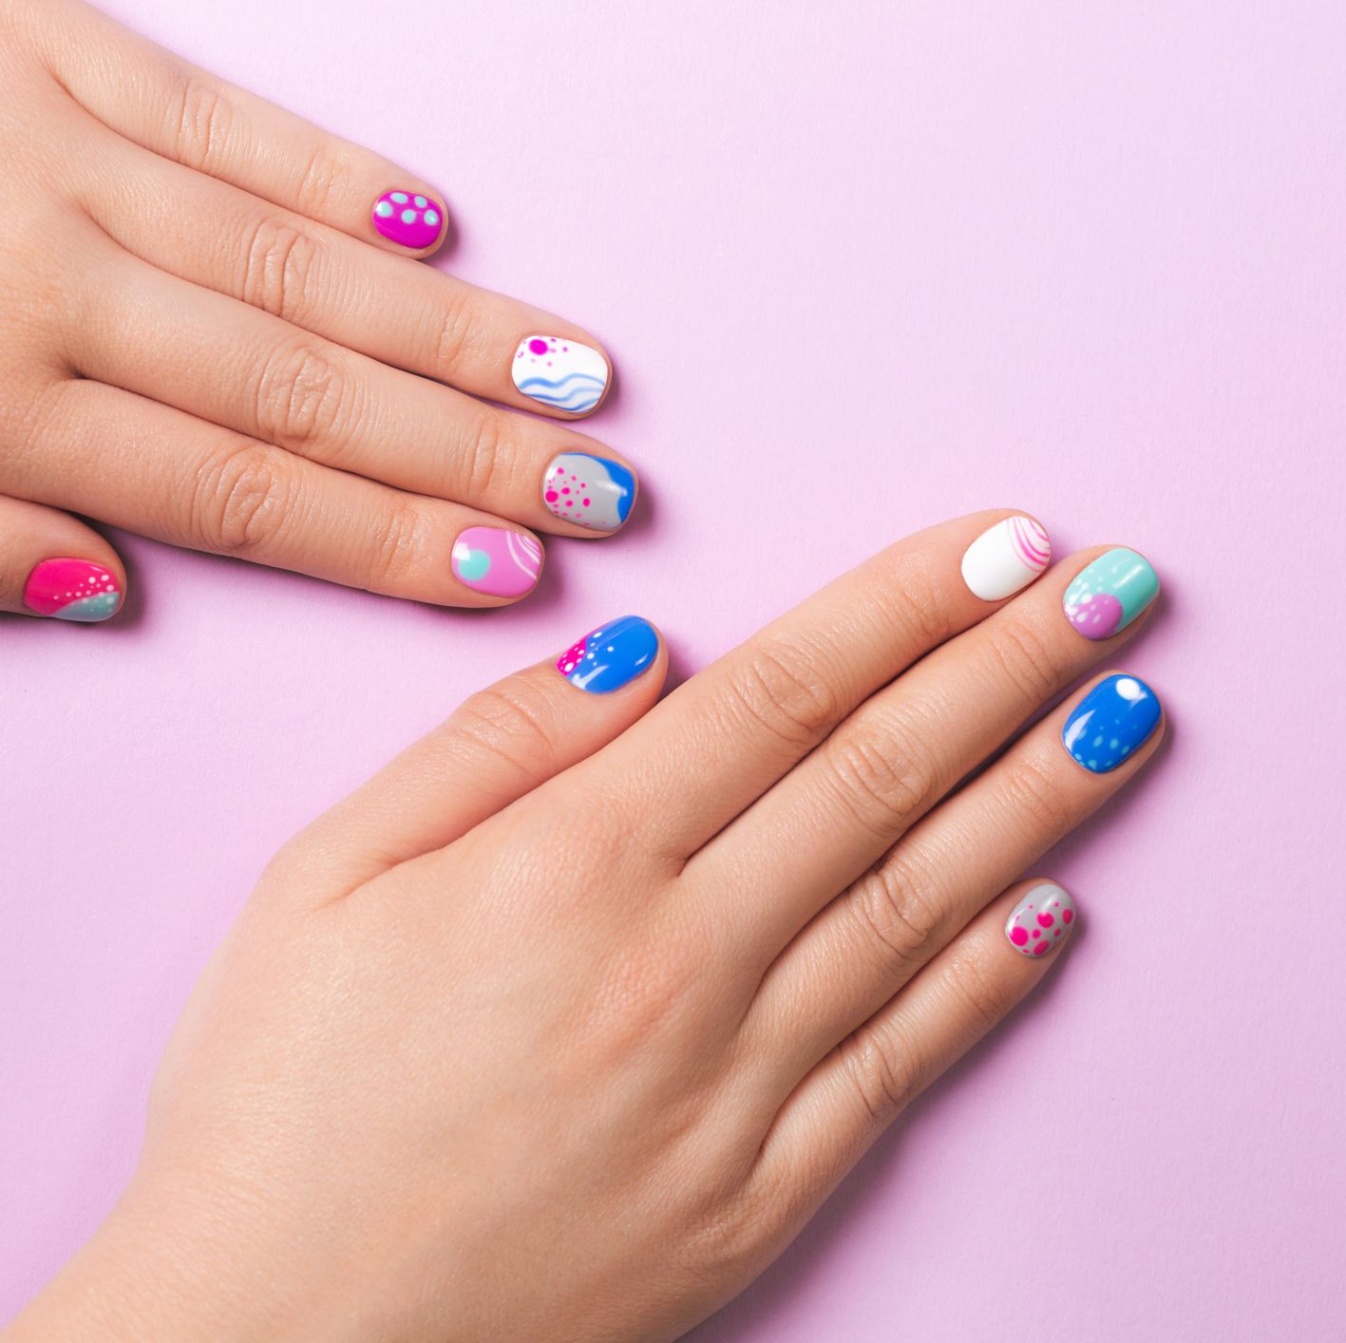 Get Dazzling Nail Dip Designs For Trendy Tips And Toes!